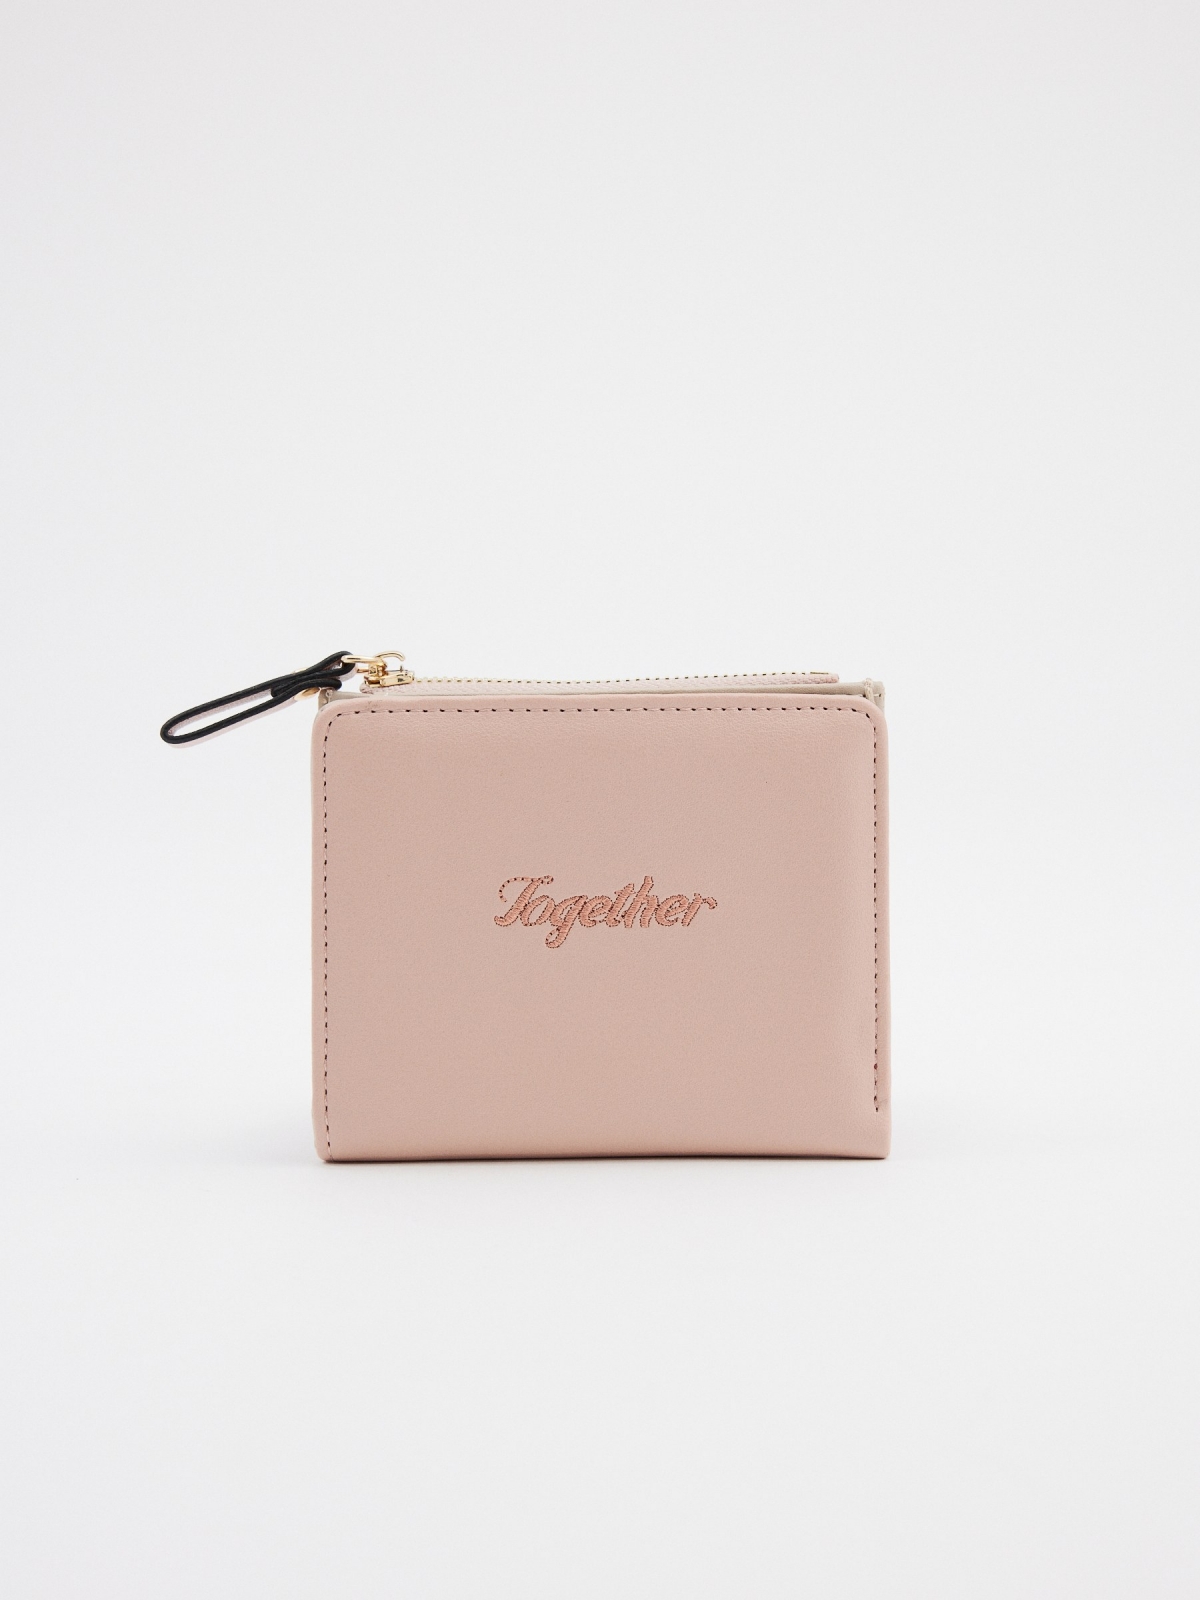 Embroidered pink wallet pink